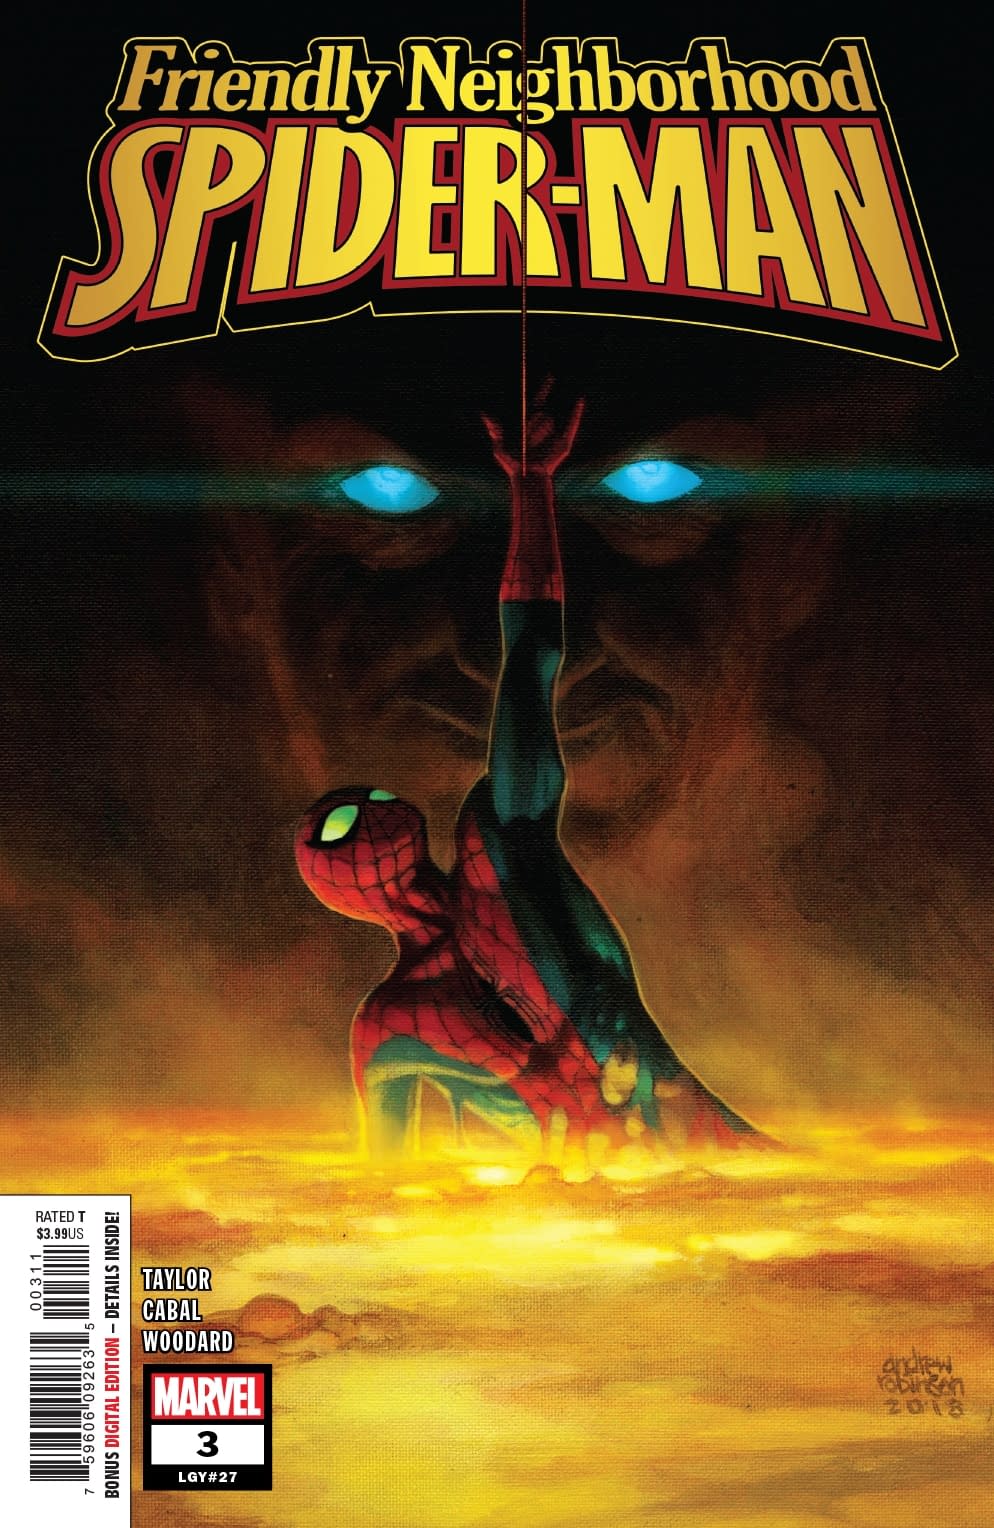 Johnny Storm is Slow on the Uptake in Next Week's Friendly Neighborhood Spider-Man #3 (Preview)